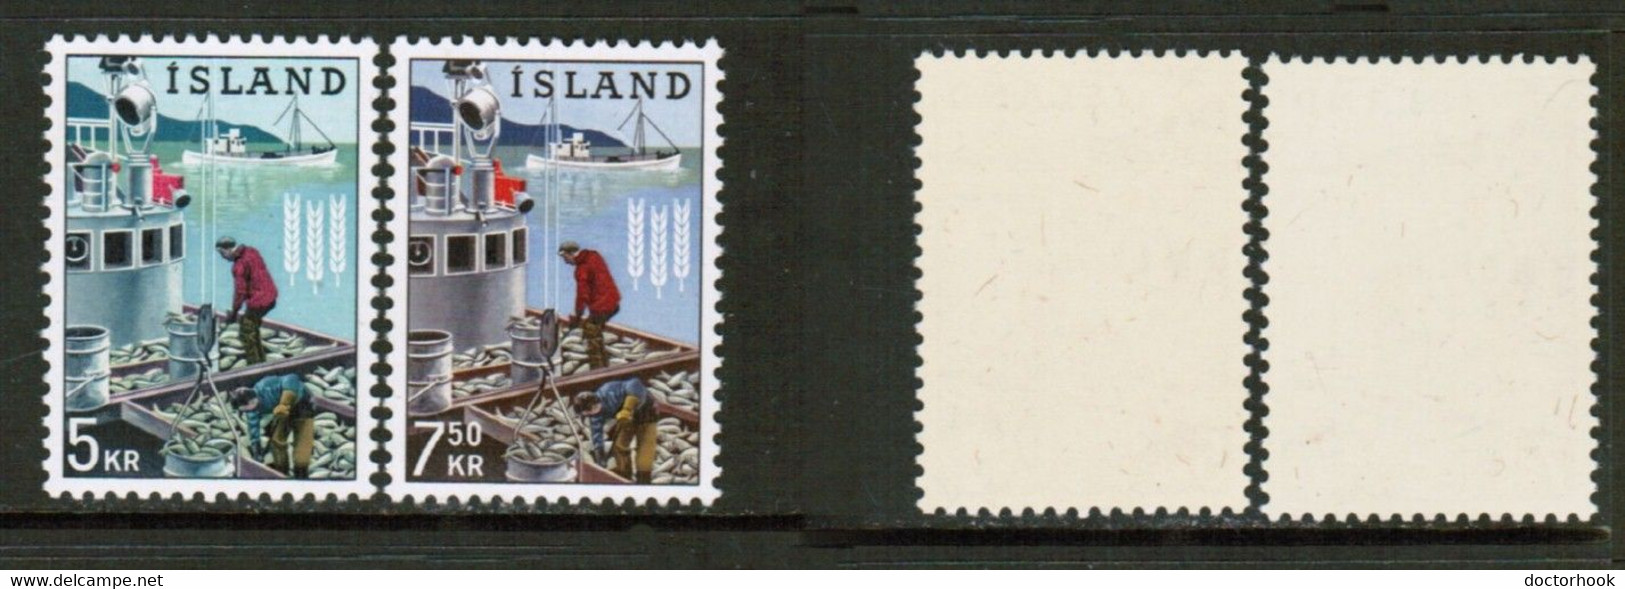 ICELAND   Scott # 354-5** MINT NH (CONDITION AS PER SCAN) (WW-2-50) - Nuovi